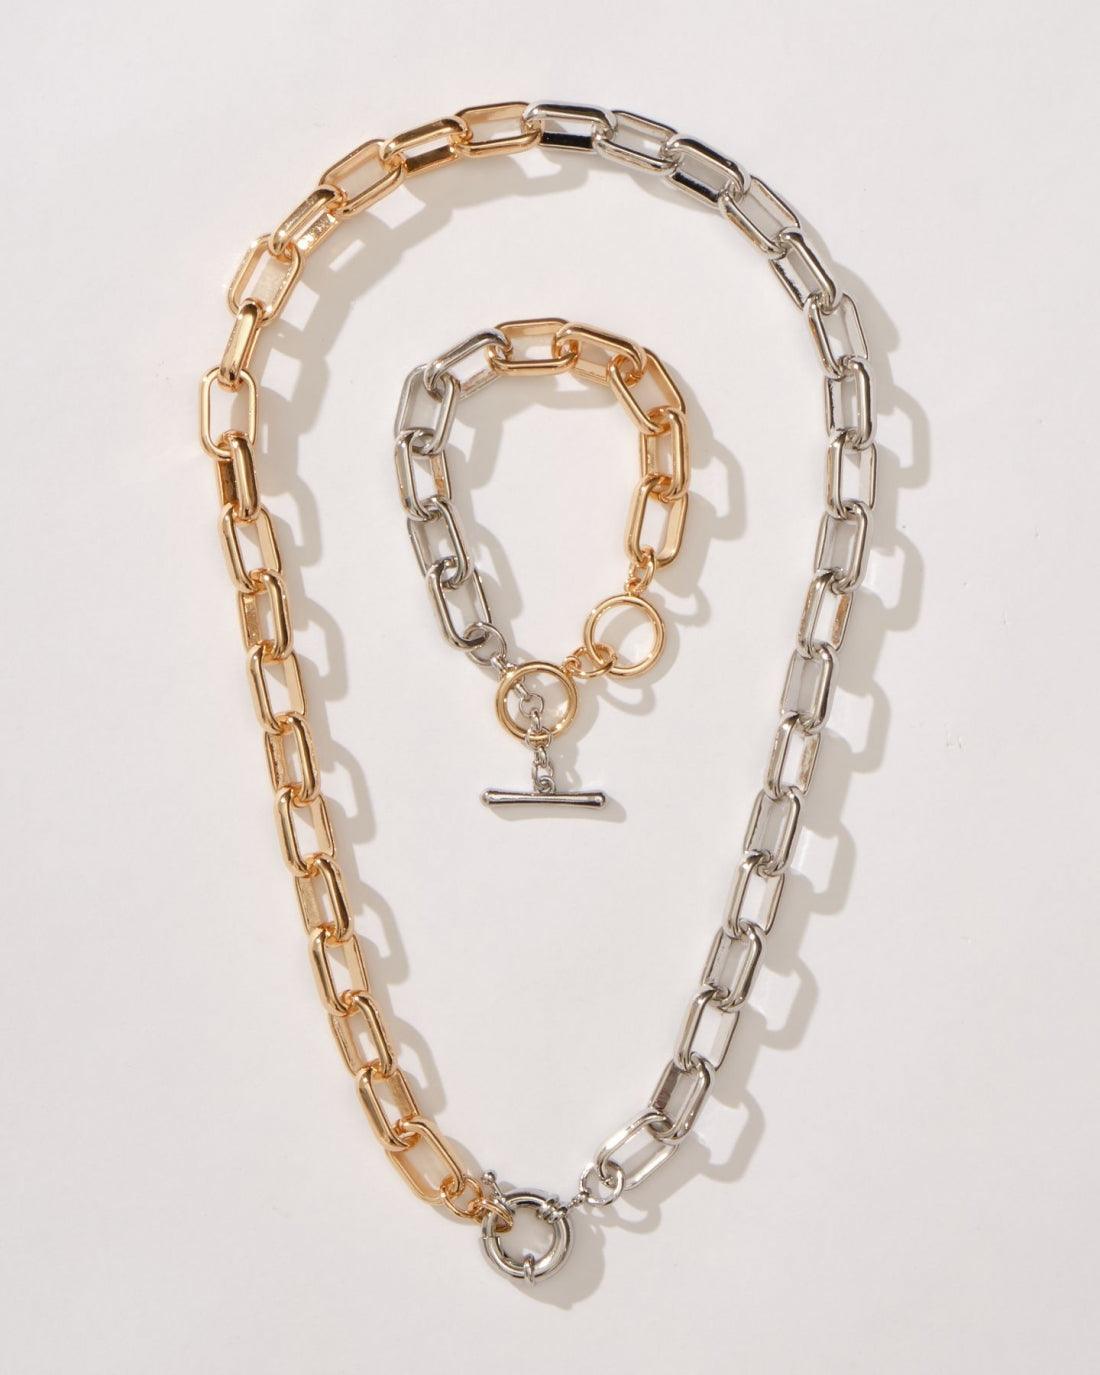 OXBOW CHAIN SET - 8 Other Reasons